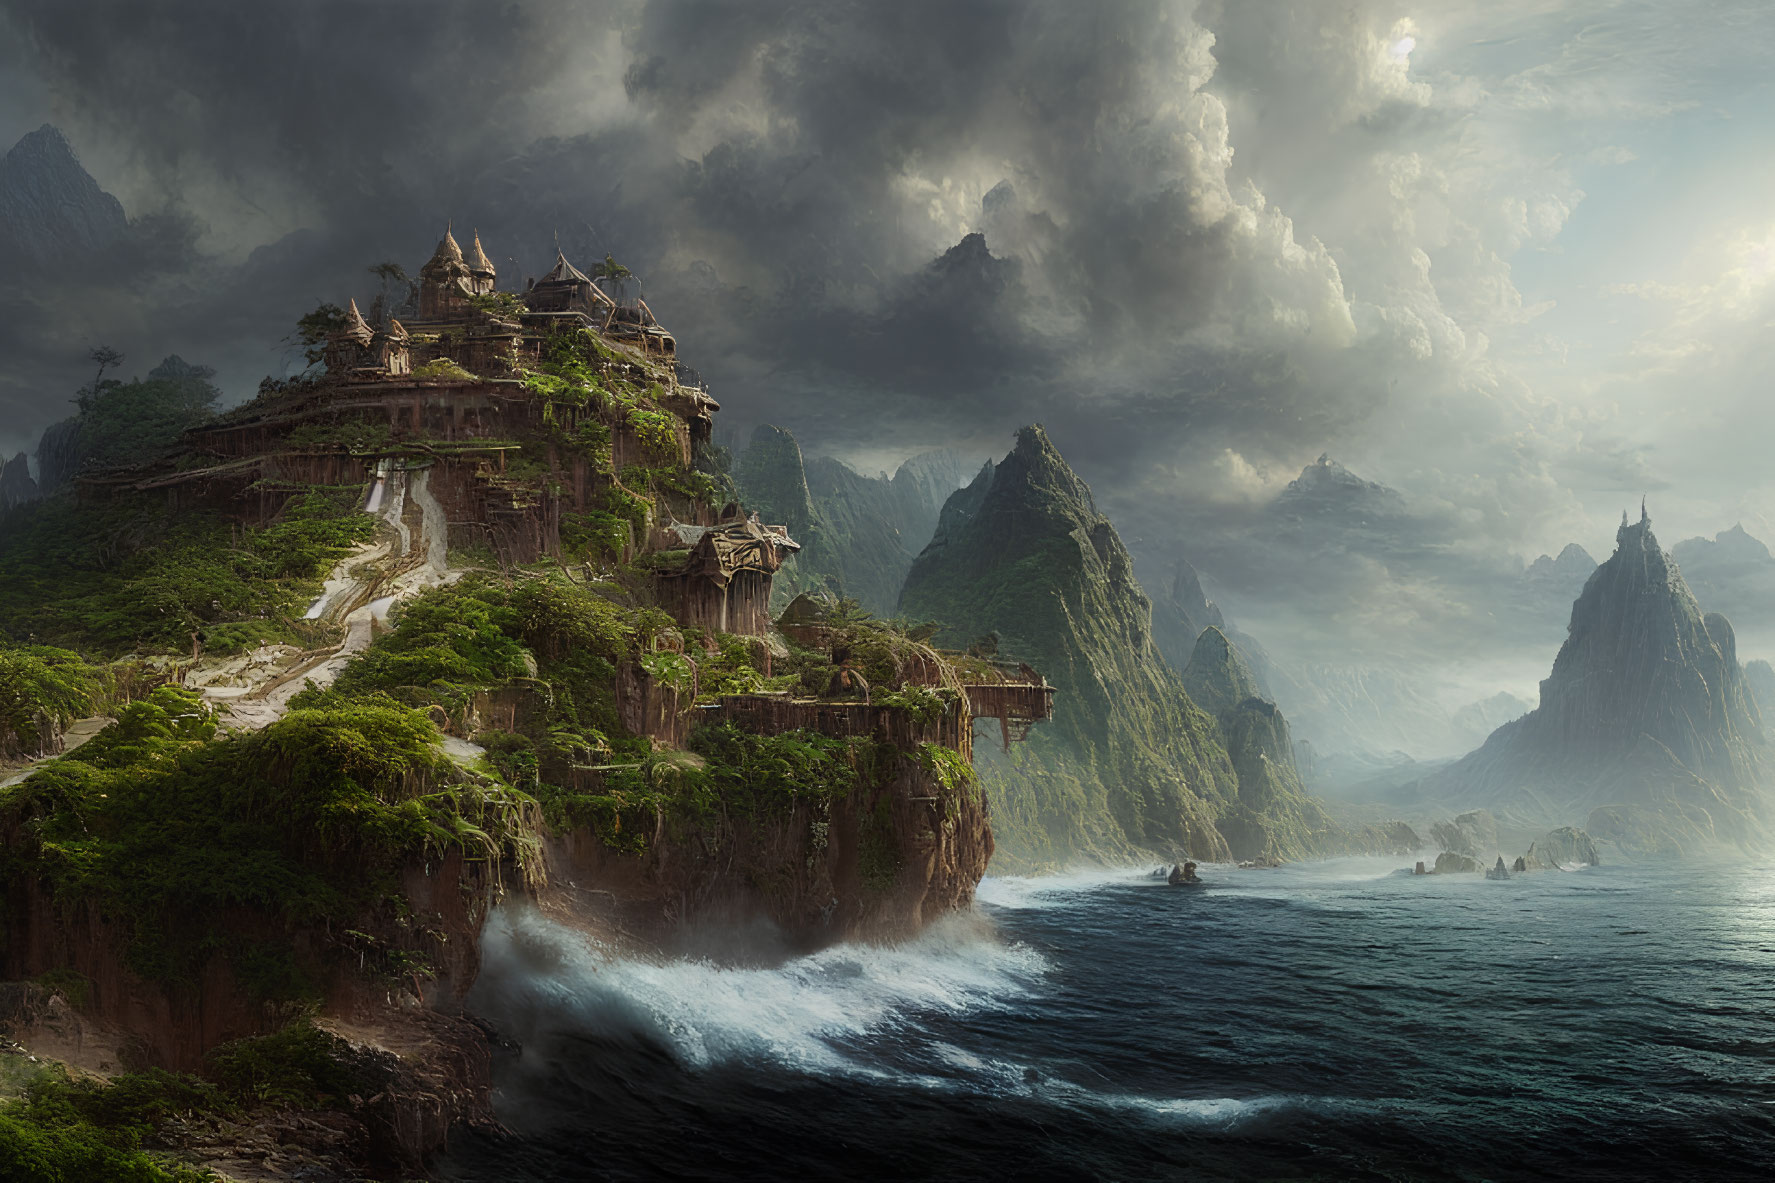 Majestic cliffside temple in ethereal landscape